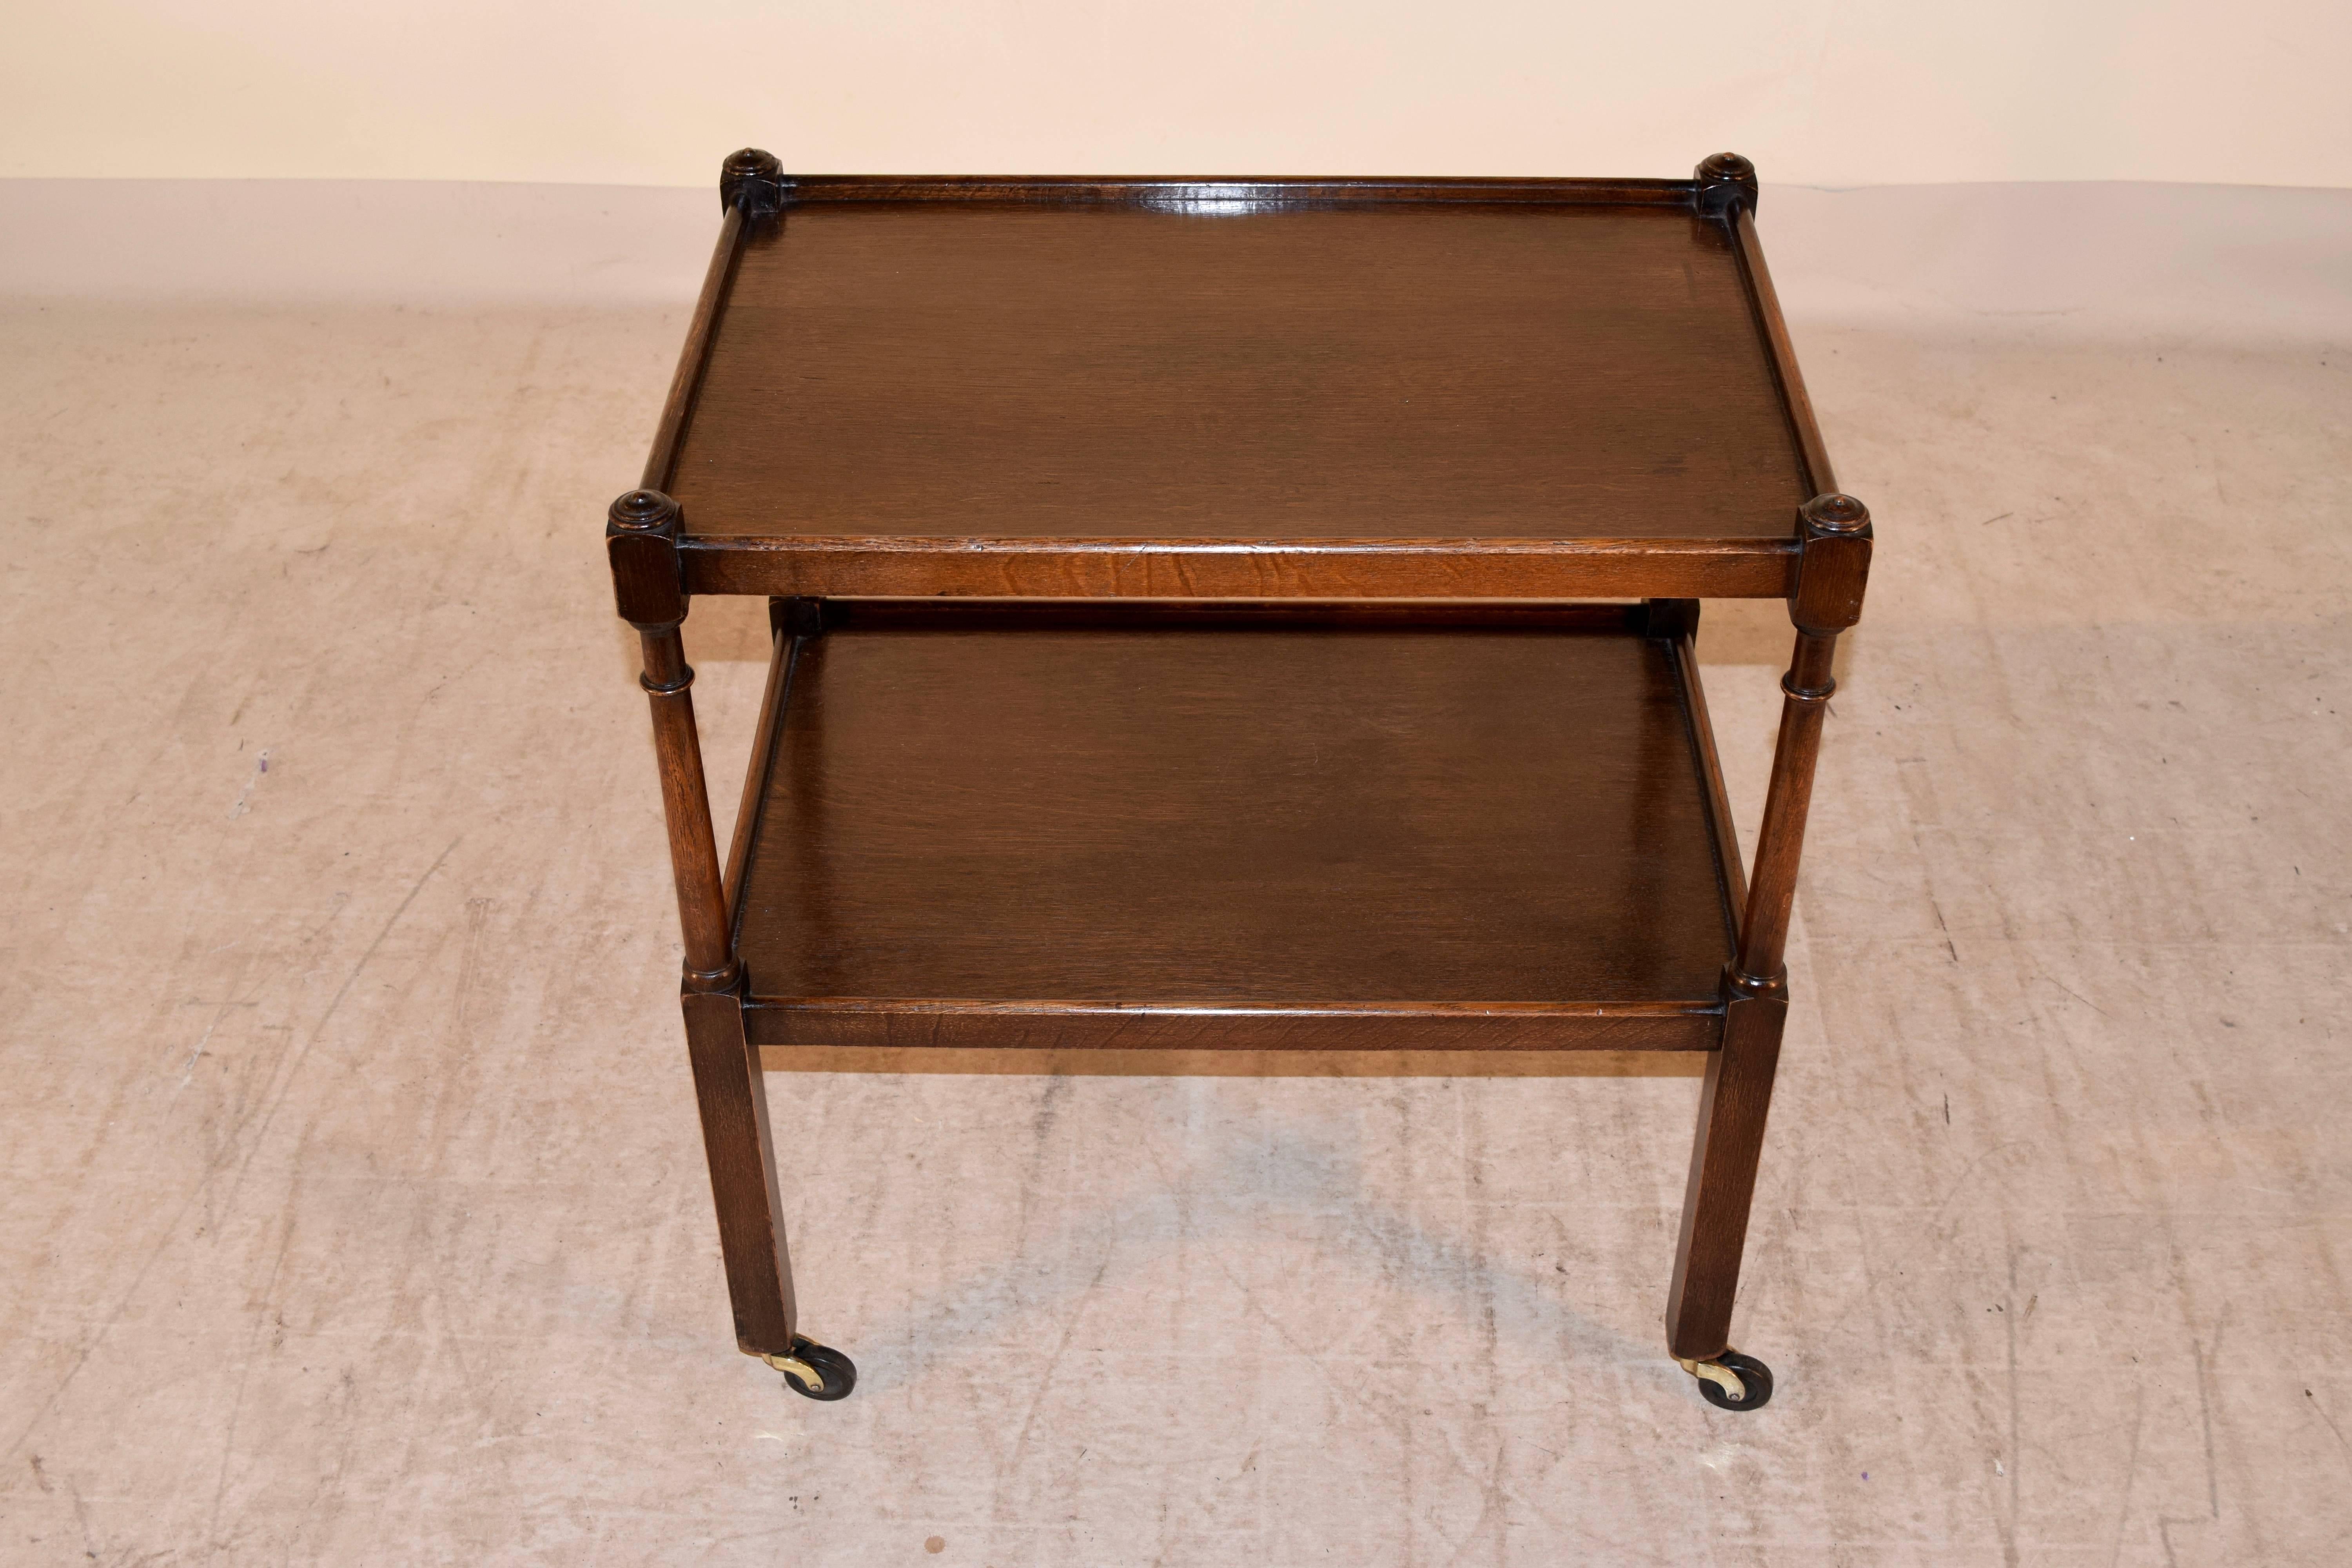 Turned Late 19th Century English Drink Cart